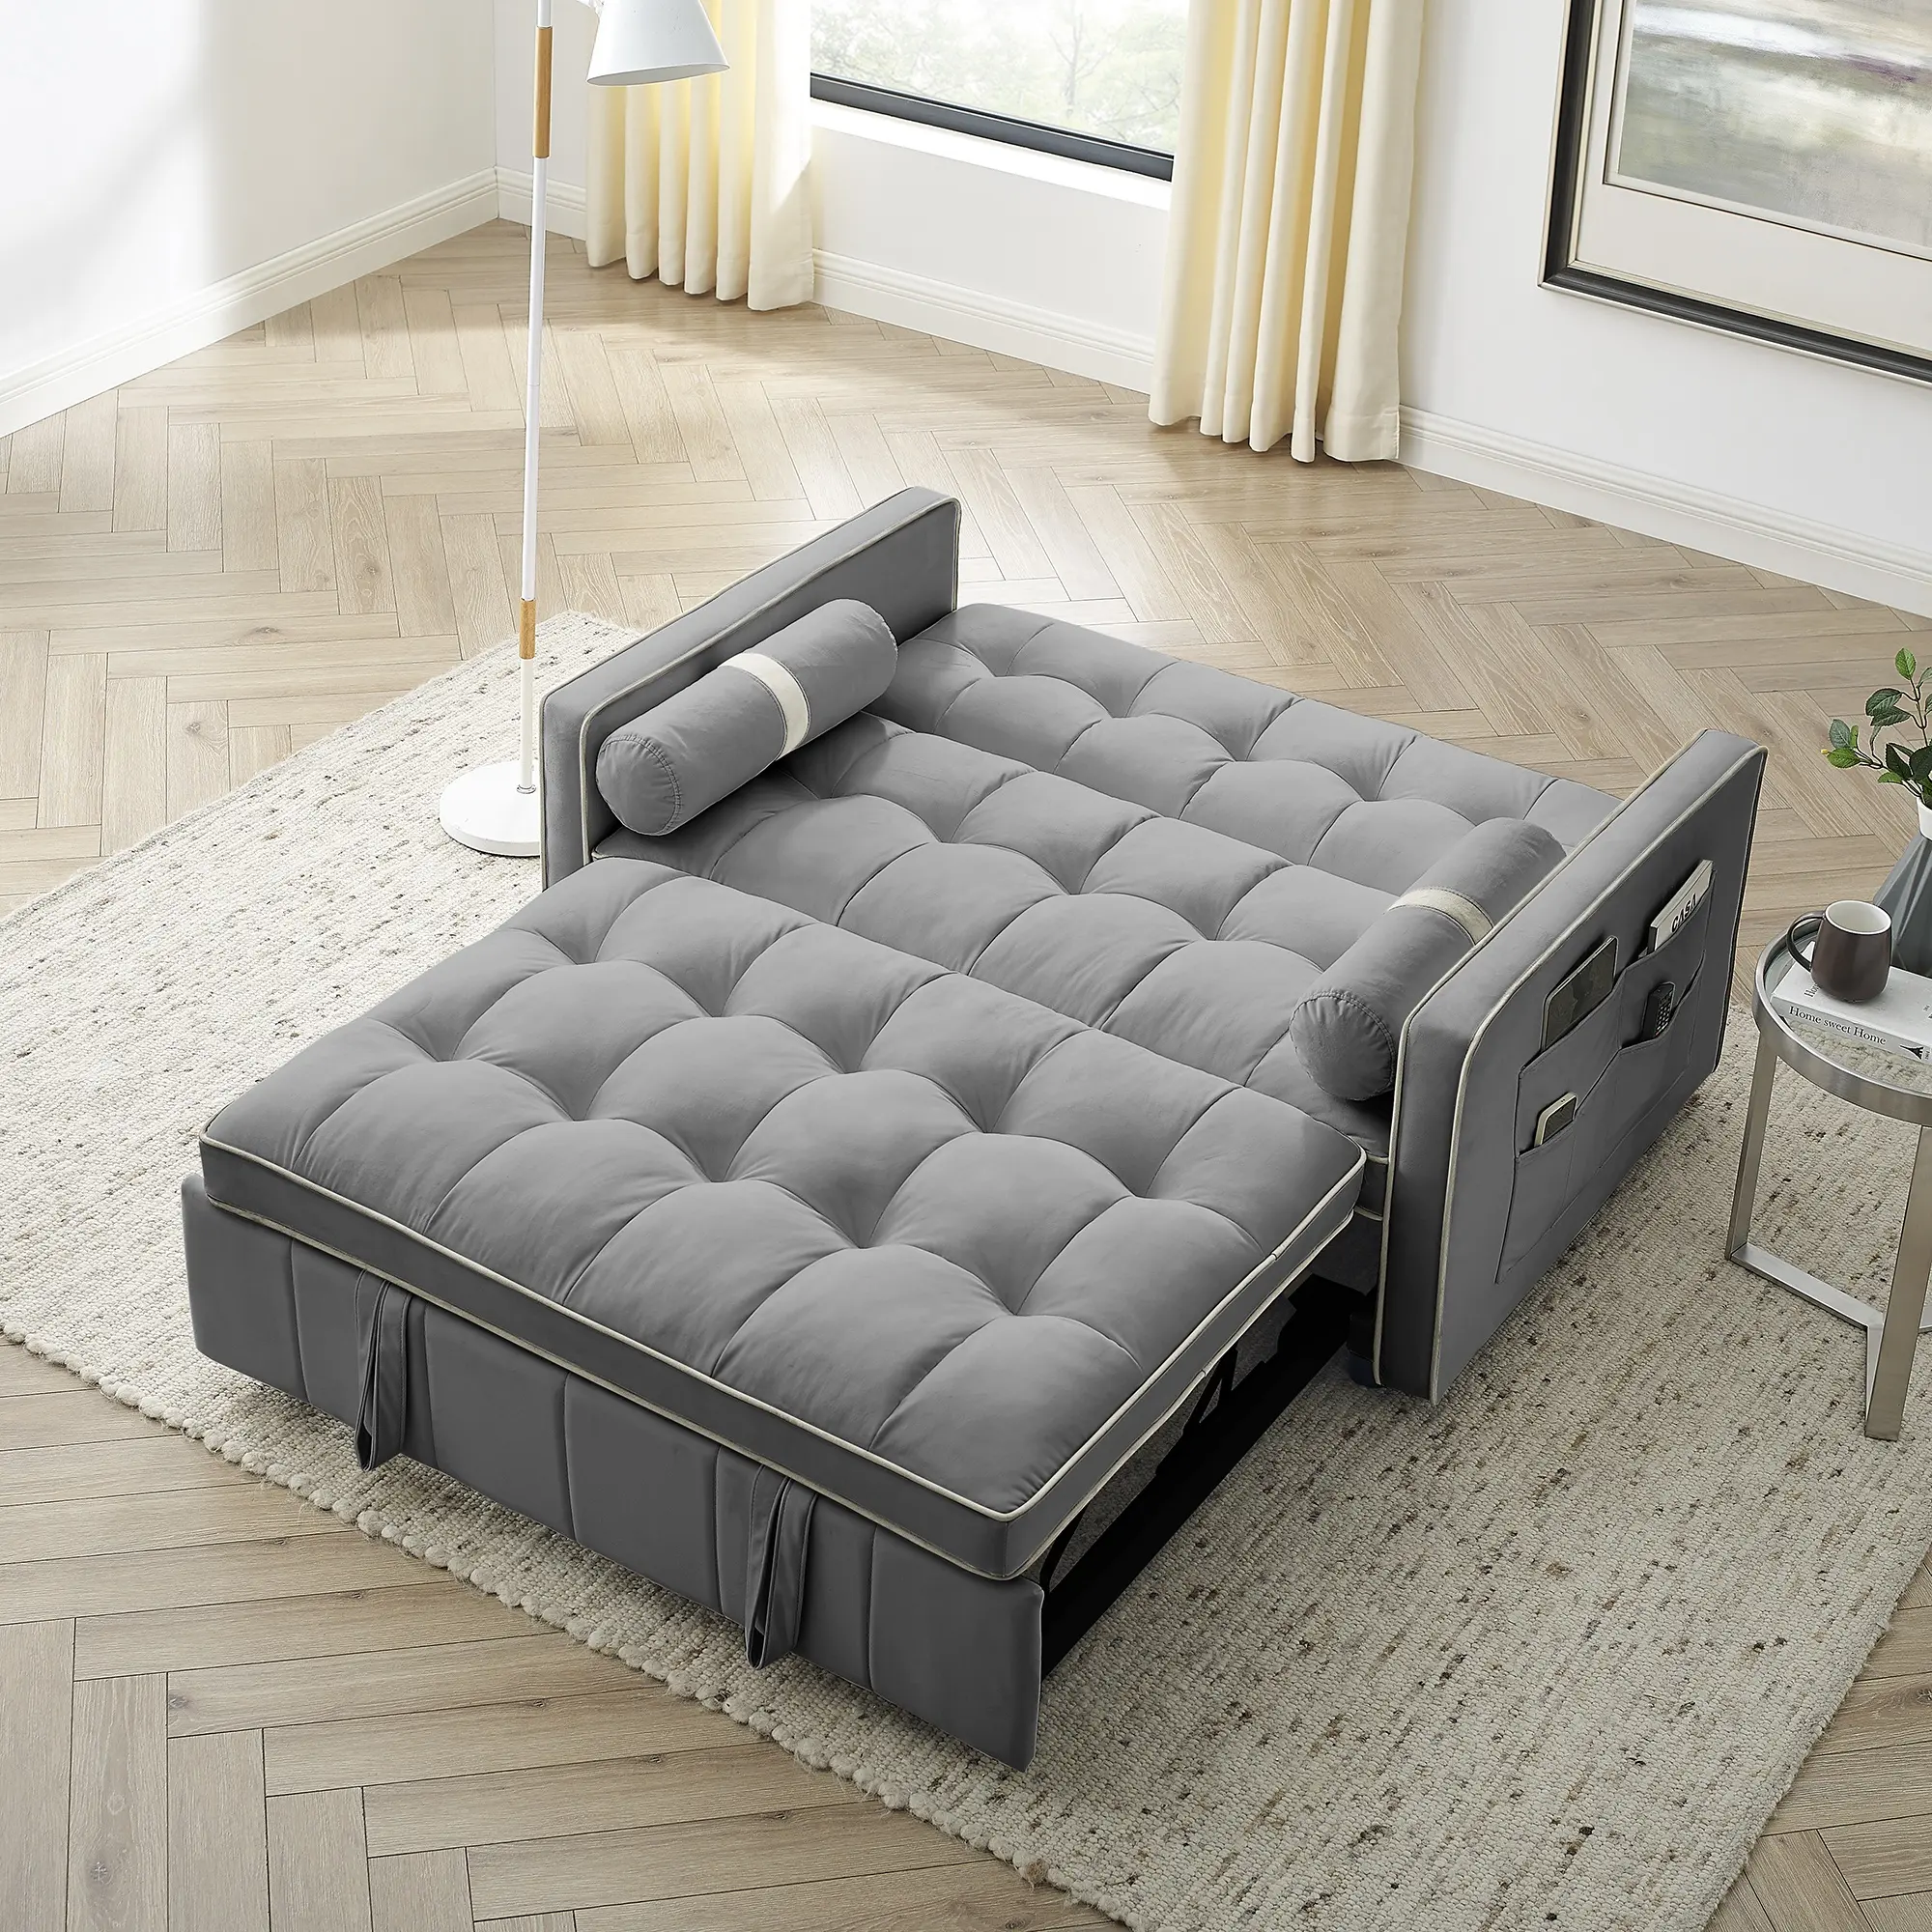 Modern 55.5 inch Pull Out Sleep Sofa Bed 2 Seater Loveseats Sofa Couch with side pockets